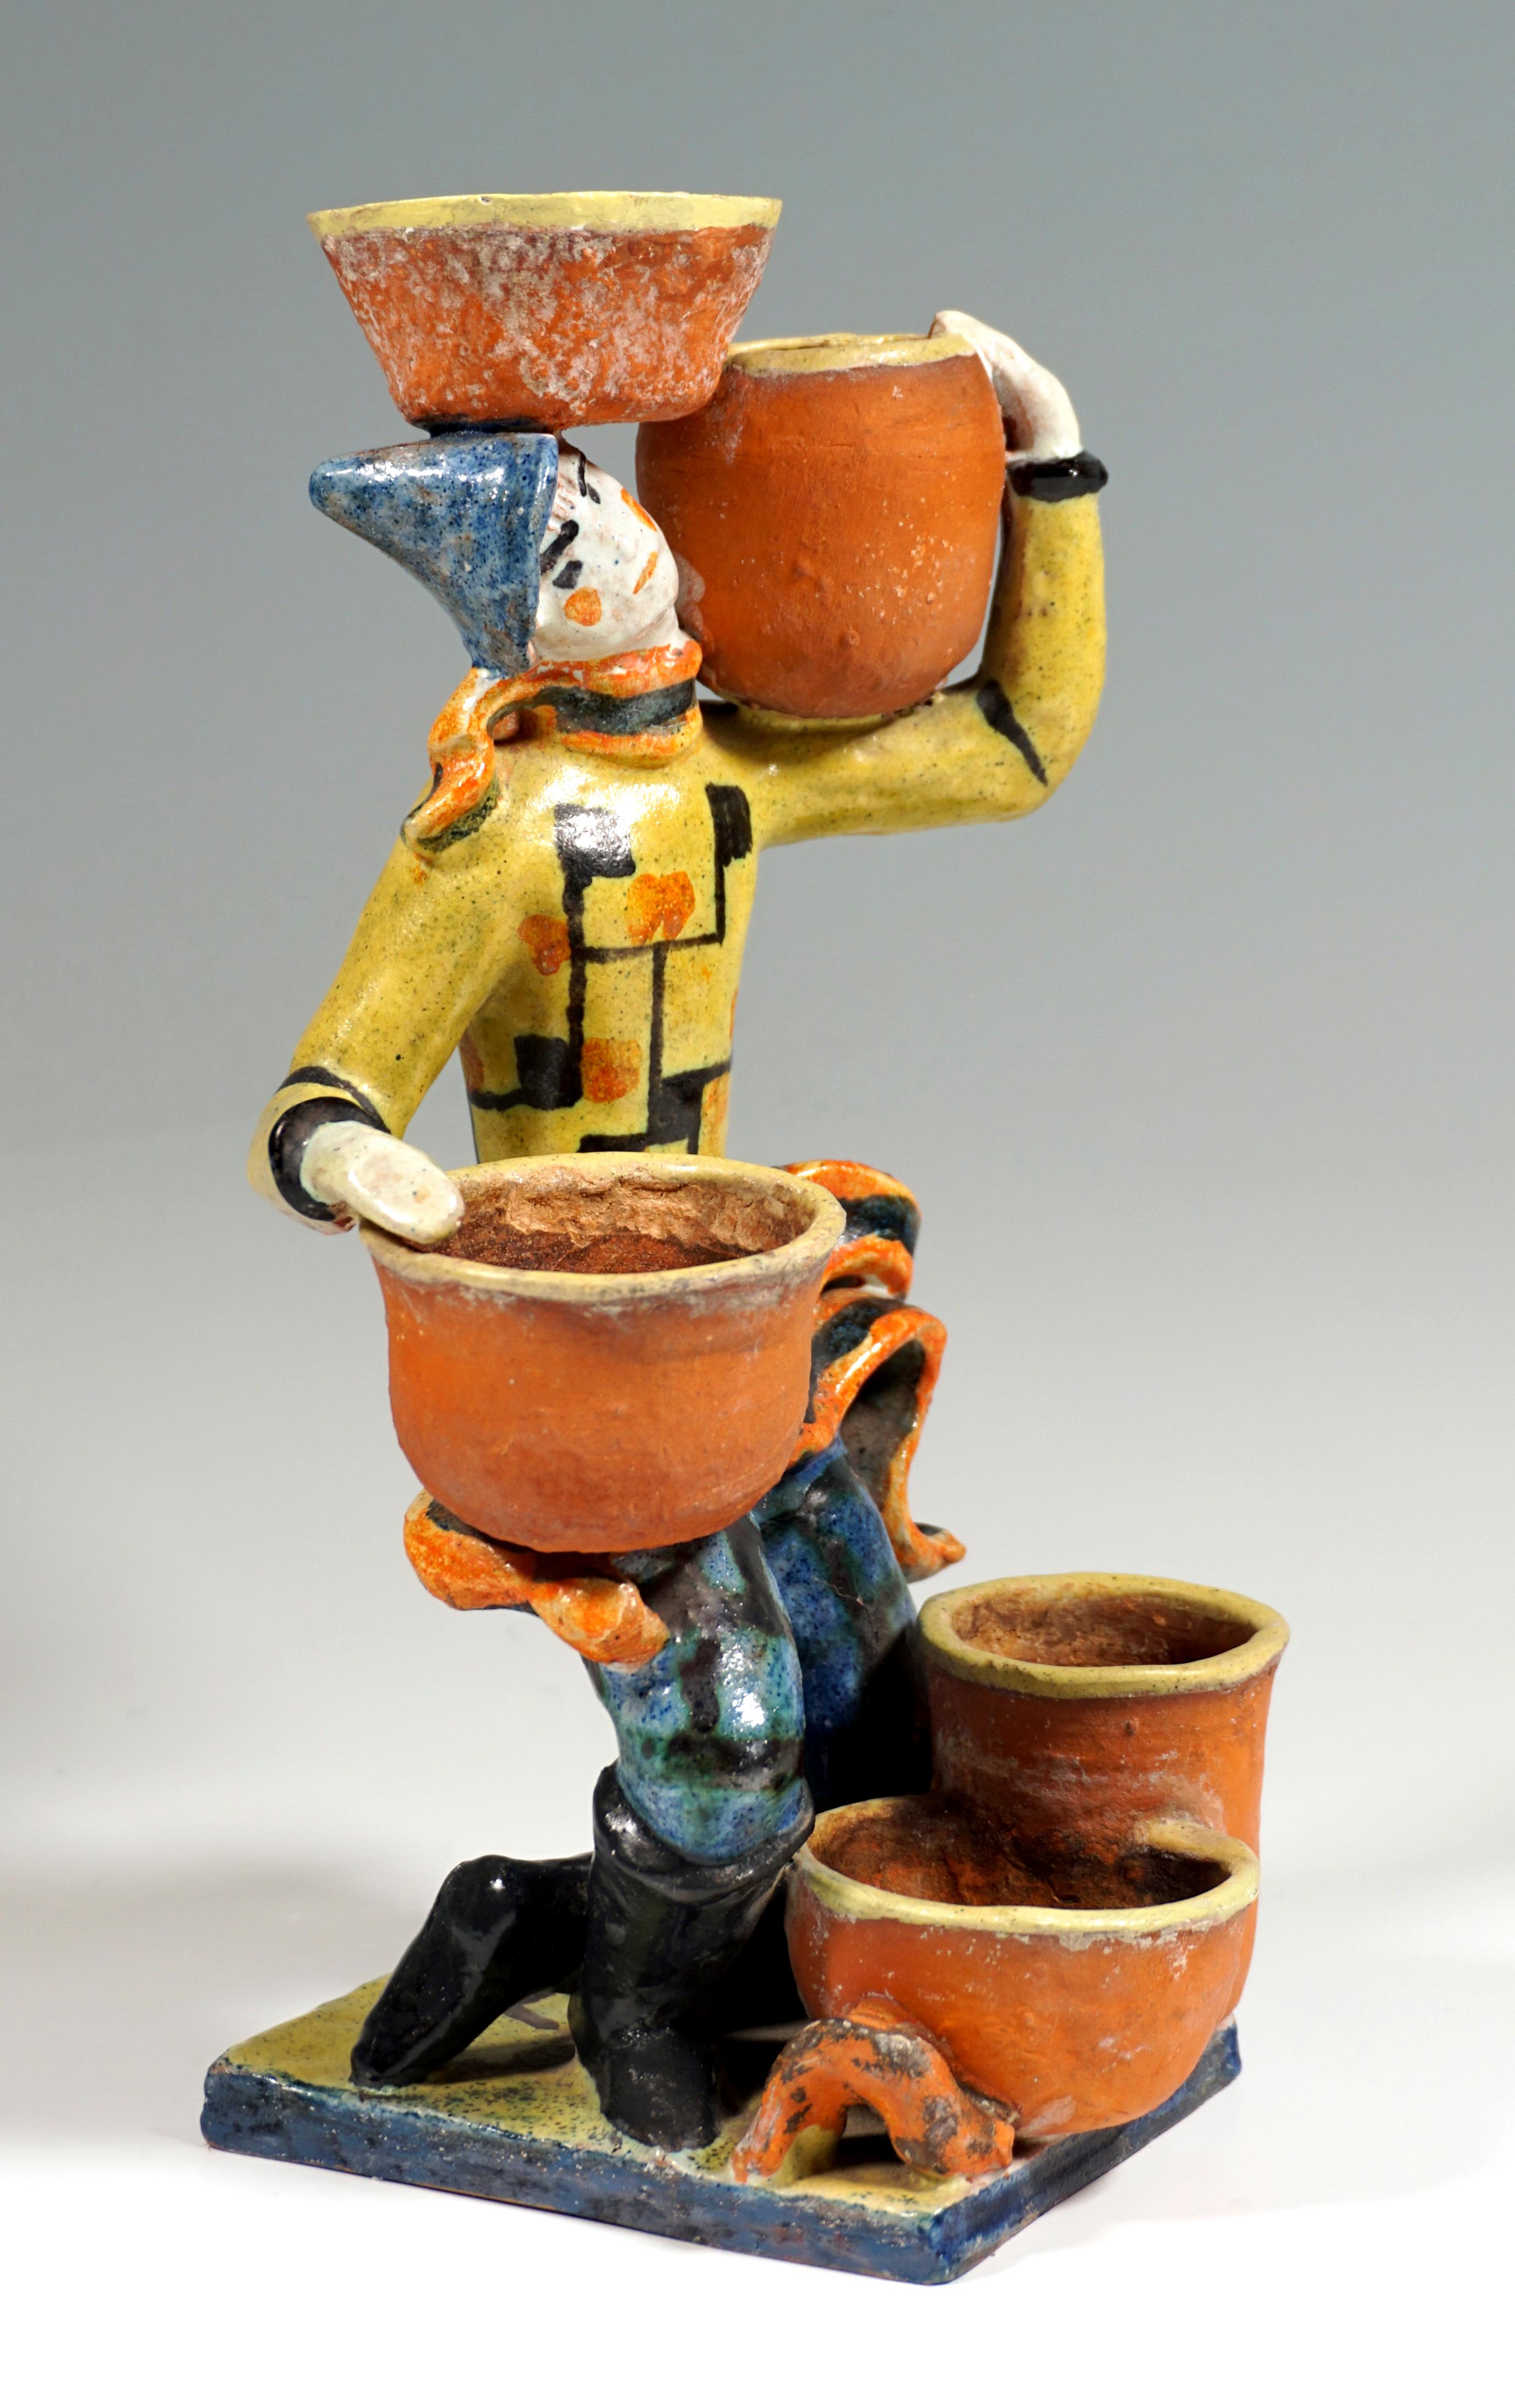 Male figure with pointed hat, kneeling on his left leg and balancing cactus pots, holding one on his left shoulder, another between it and his head, one on his right thigh, two more pots standing on the ground in front of him. On a thin, rectangular